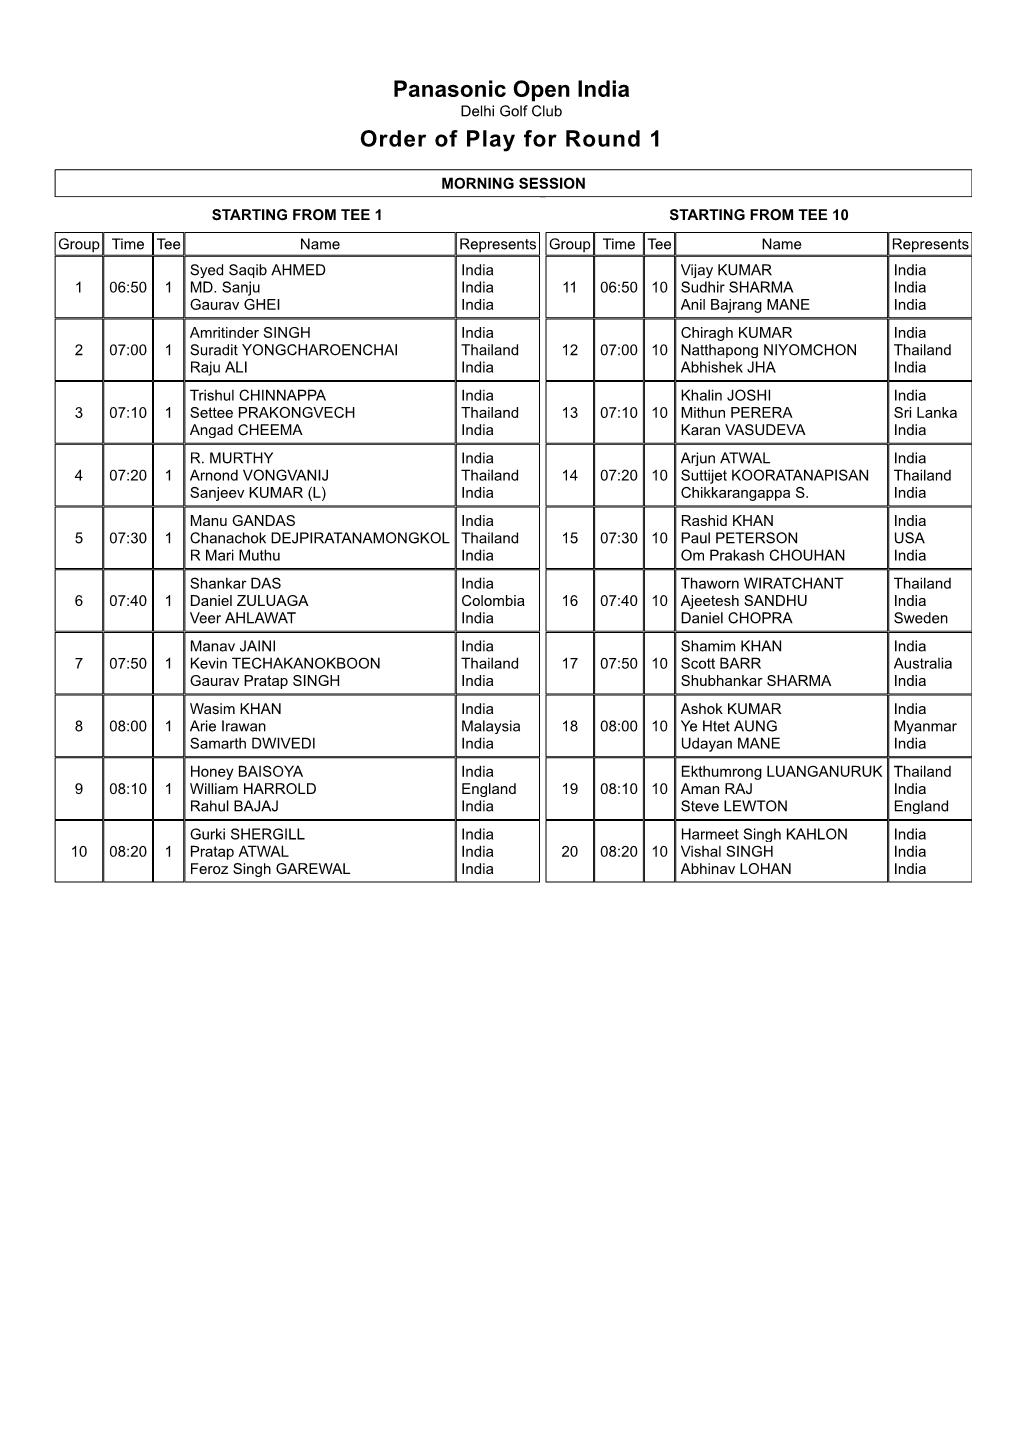 Panasonic Open India Order of Play for Round 1